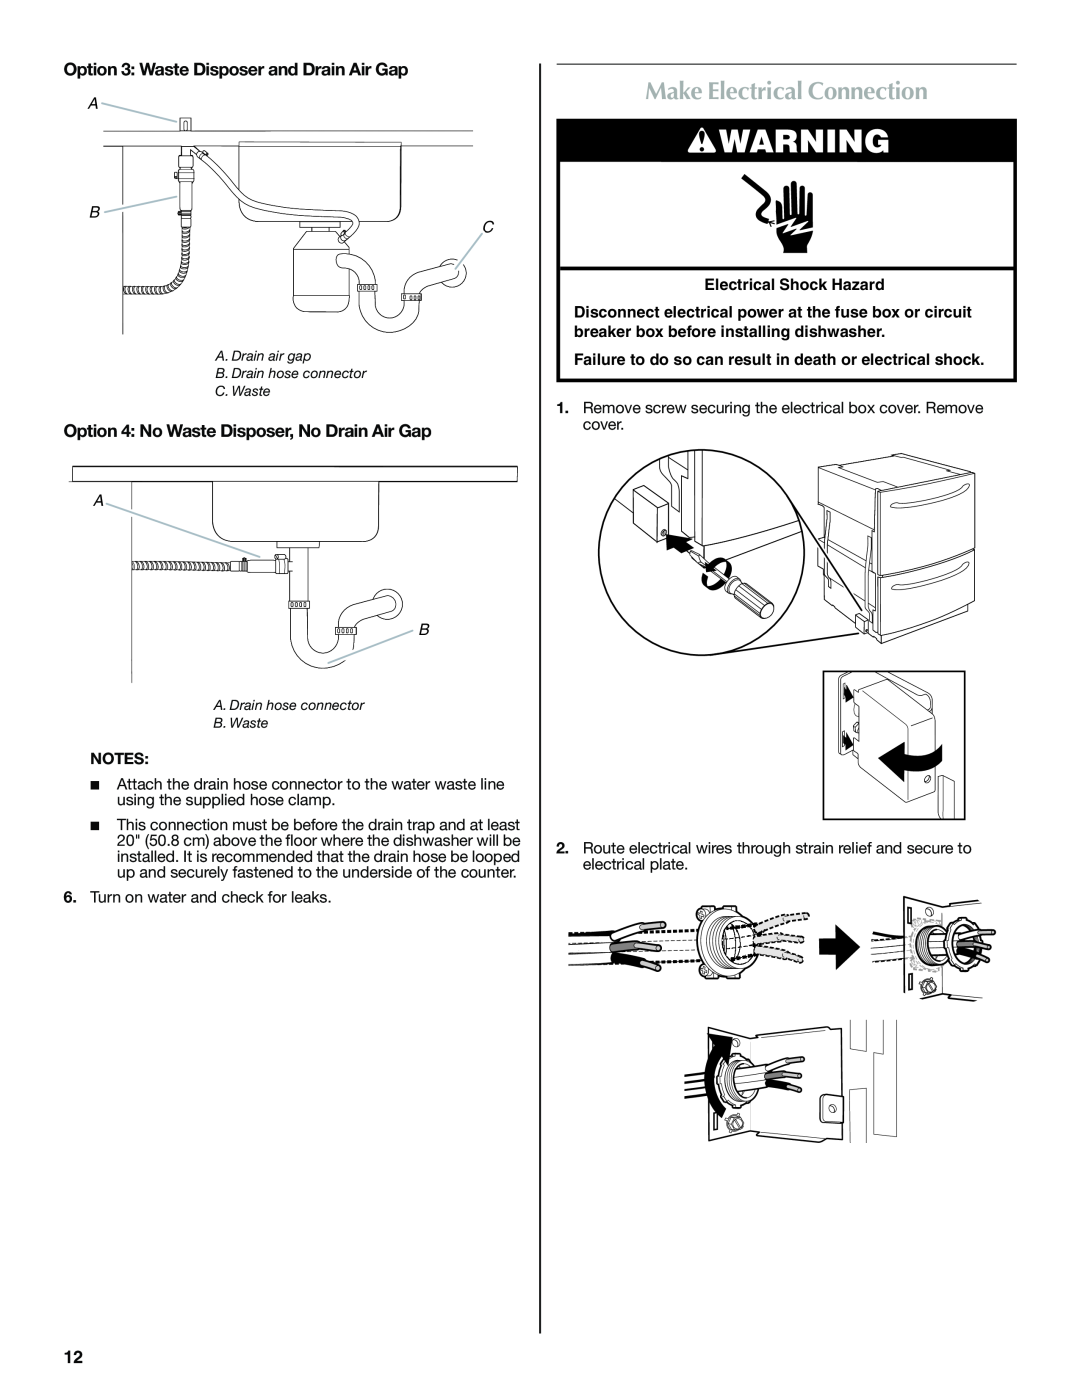 Maytag W10300218B installation instructions Make Electrical Connection, Option 3 Waste Disposer and Drain Air Gap, A B C 